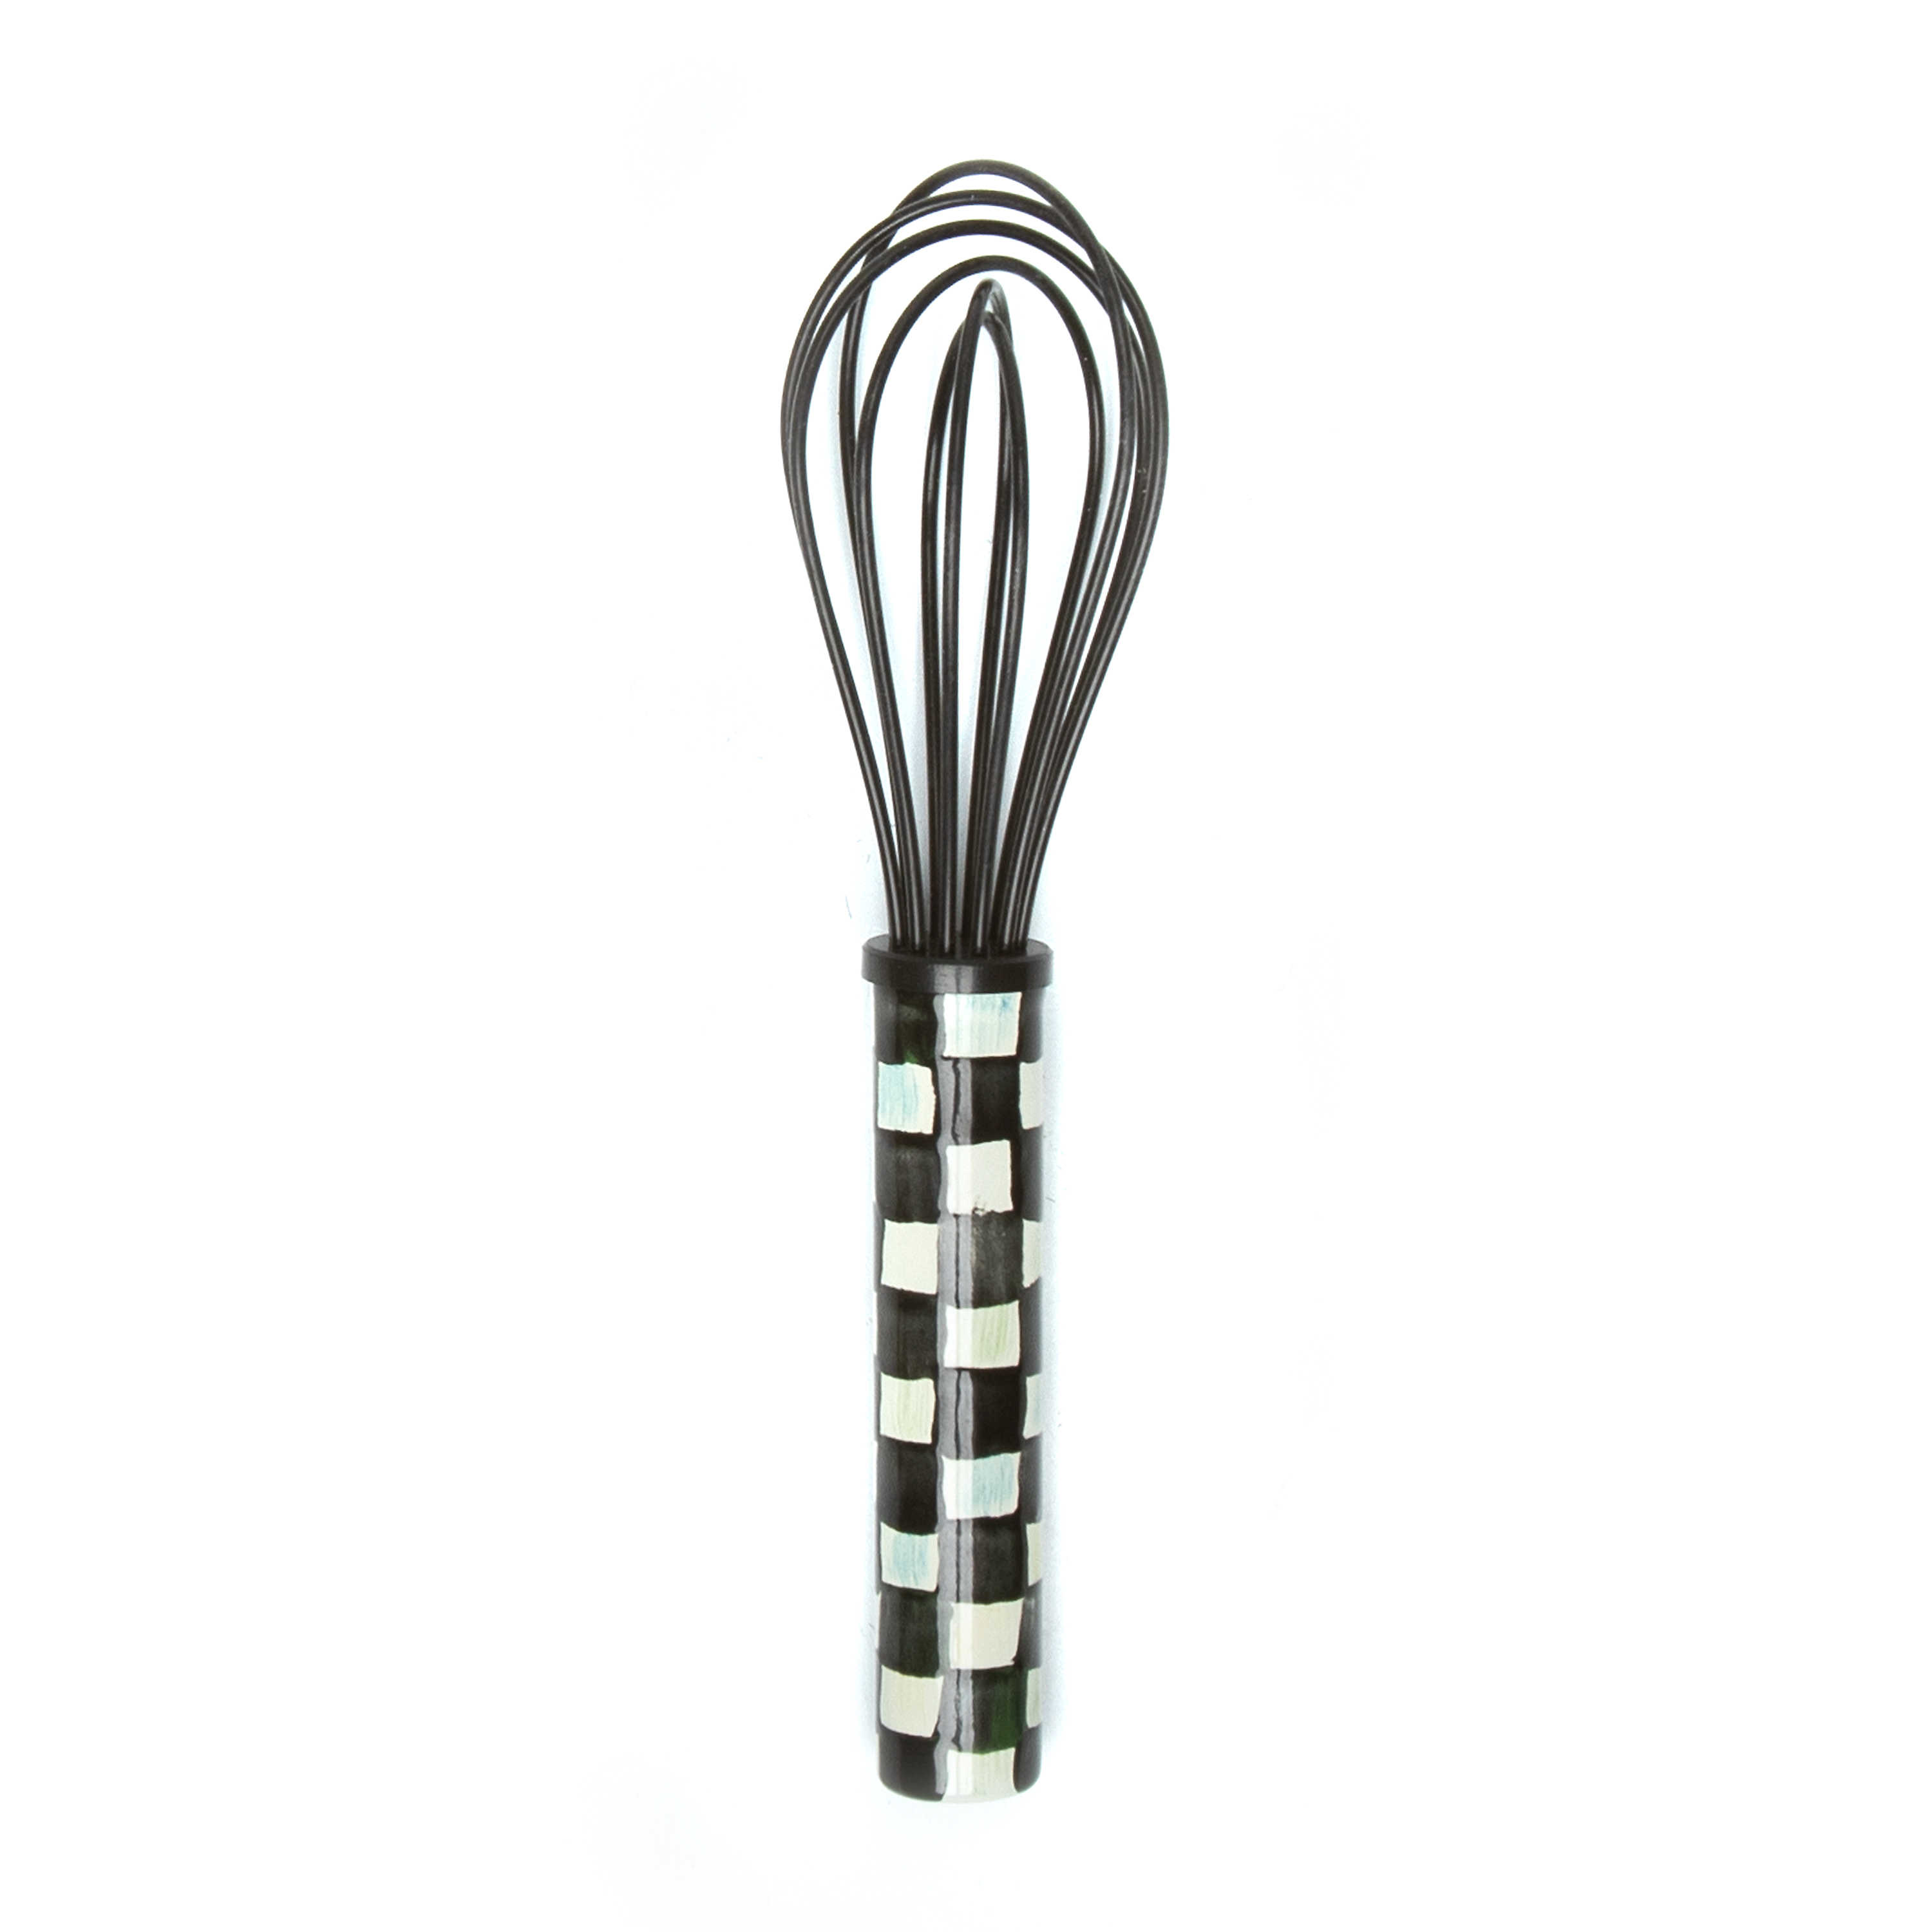 Courtly Check Small Whisk - Black mackenzie-childs Panama 0